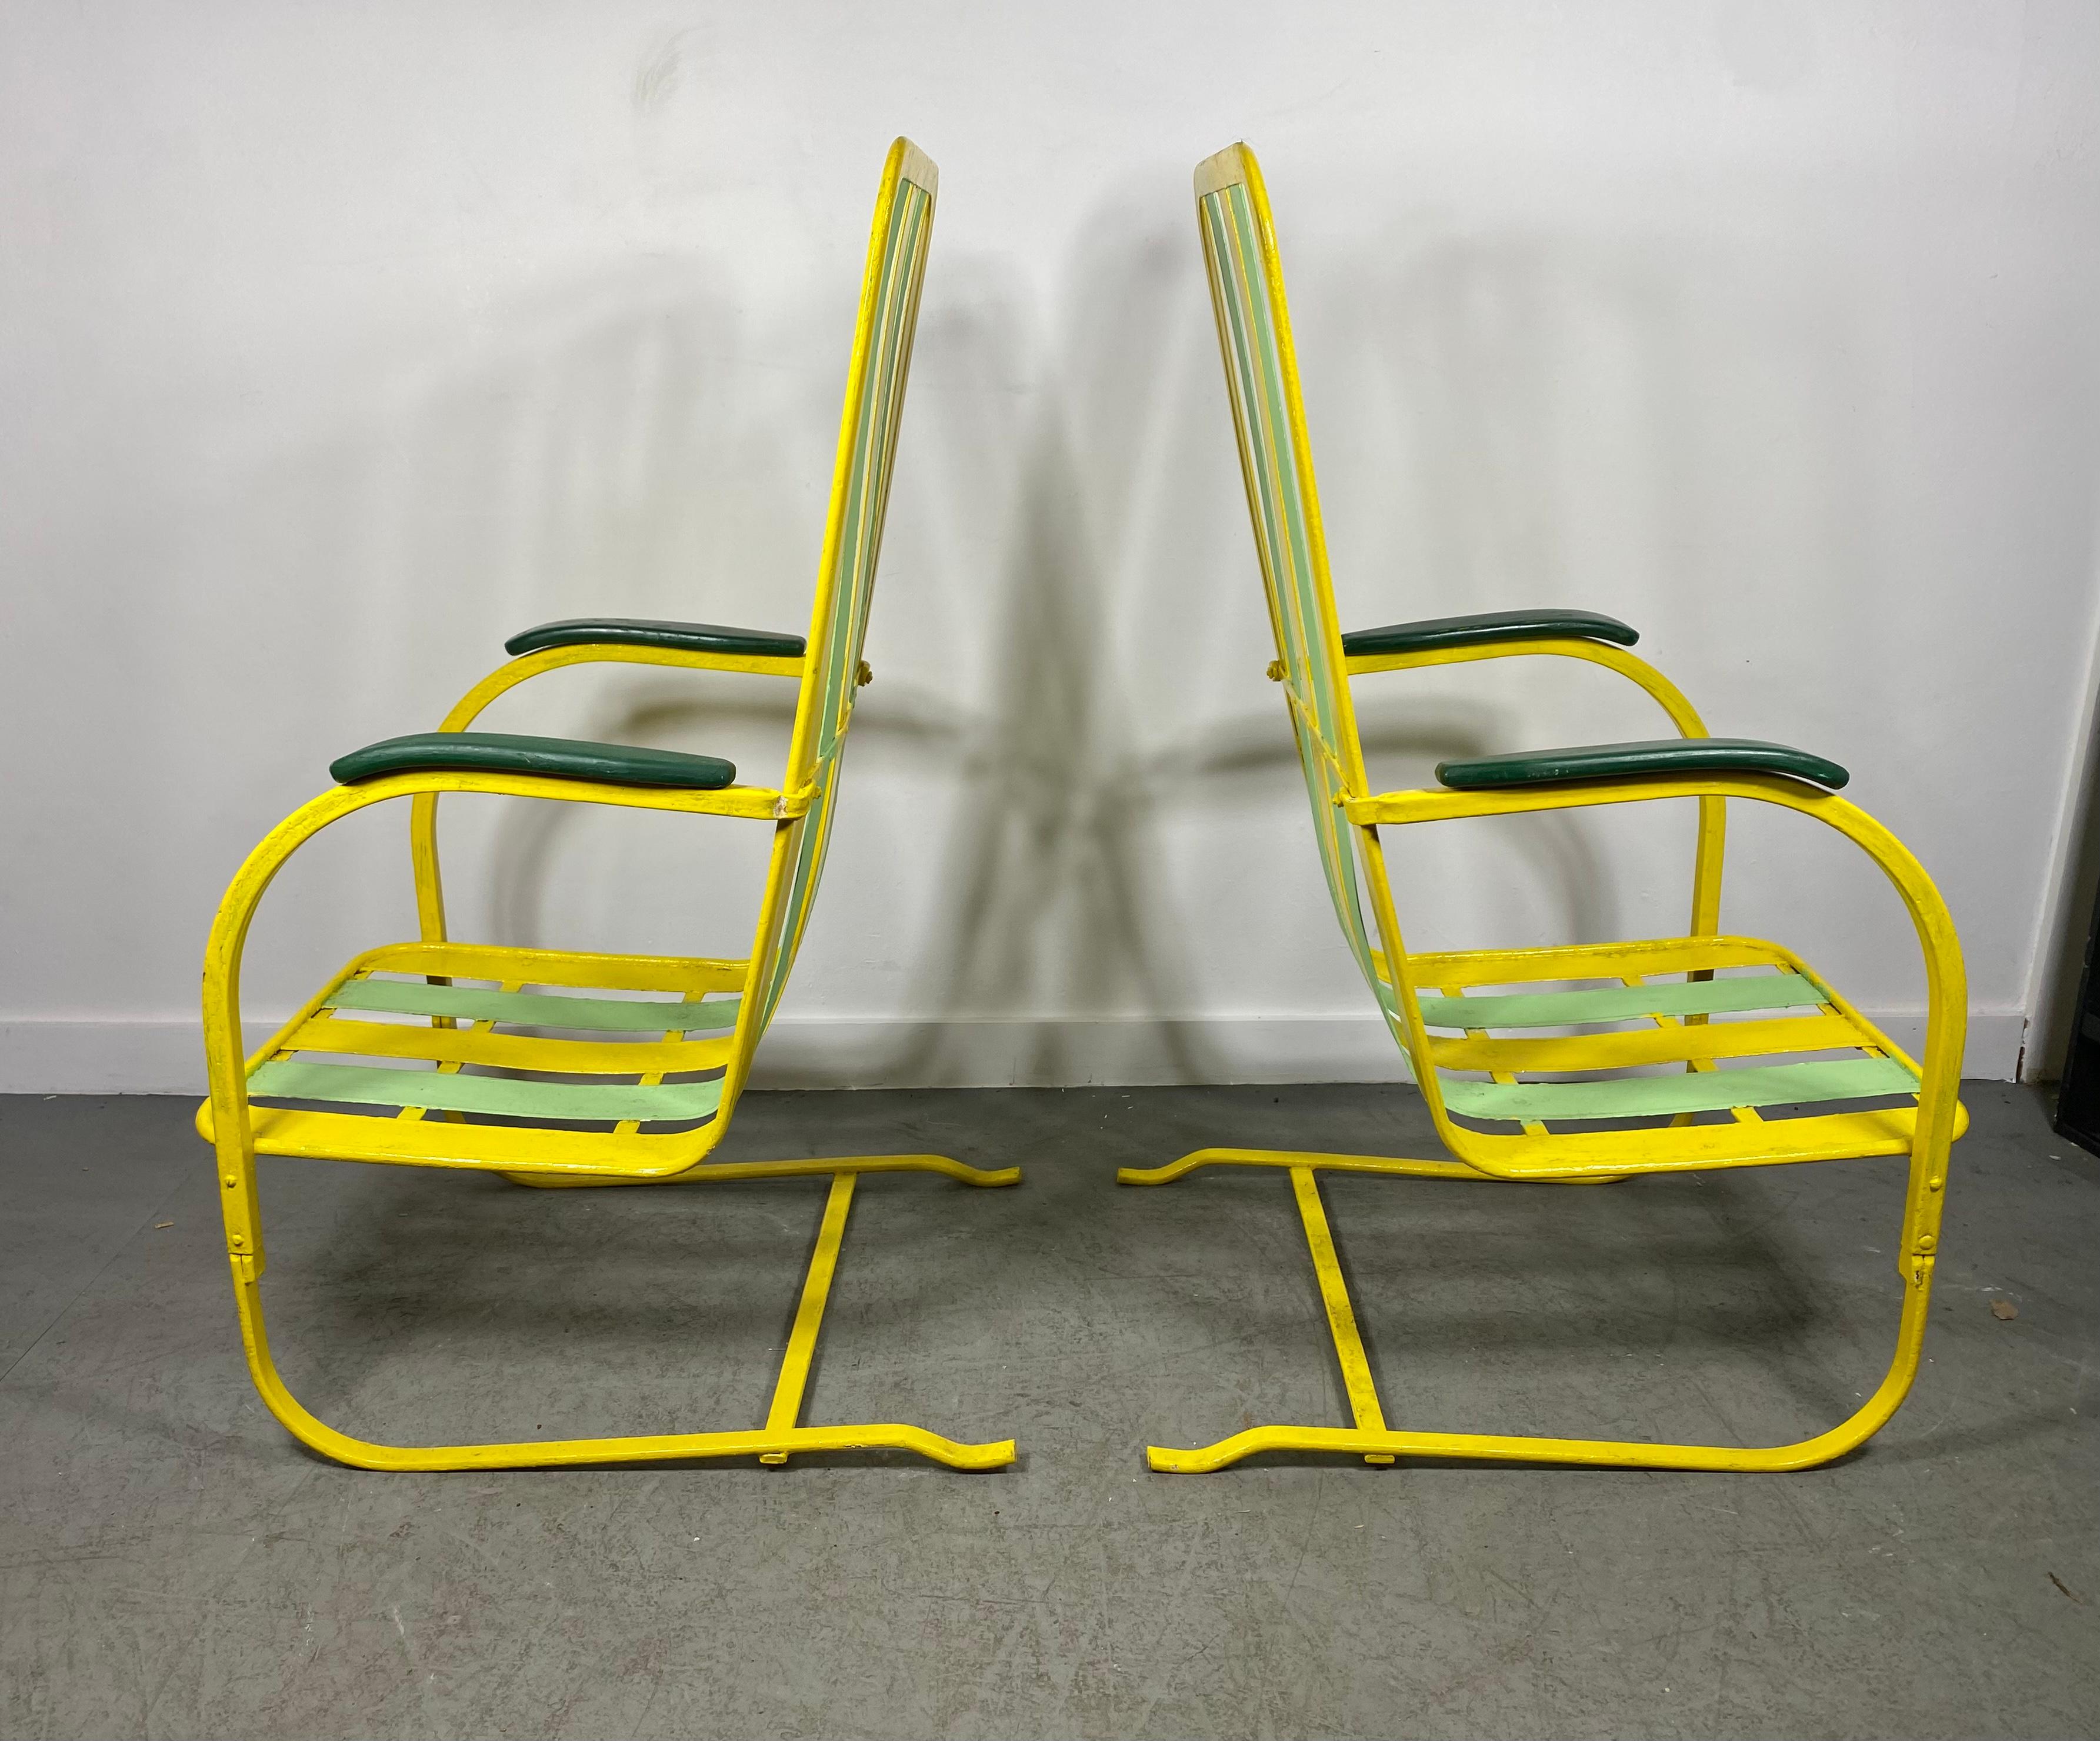 Painted Classic Pair Art Deco High Back Slatted Spring Steel Lounge Chairs For Sale